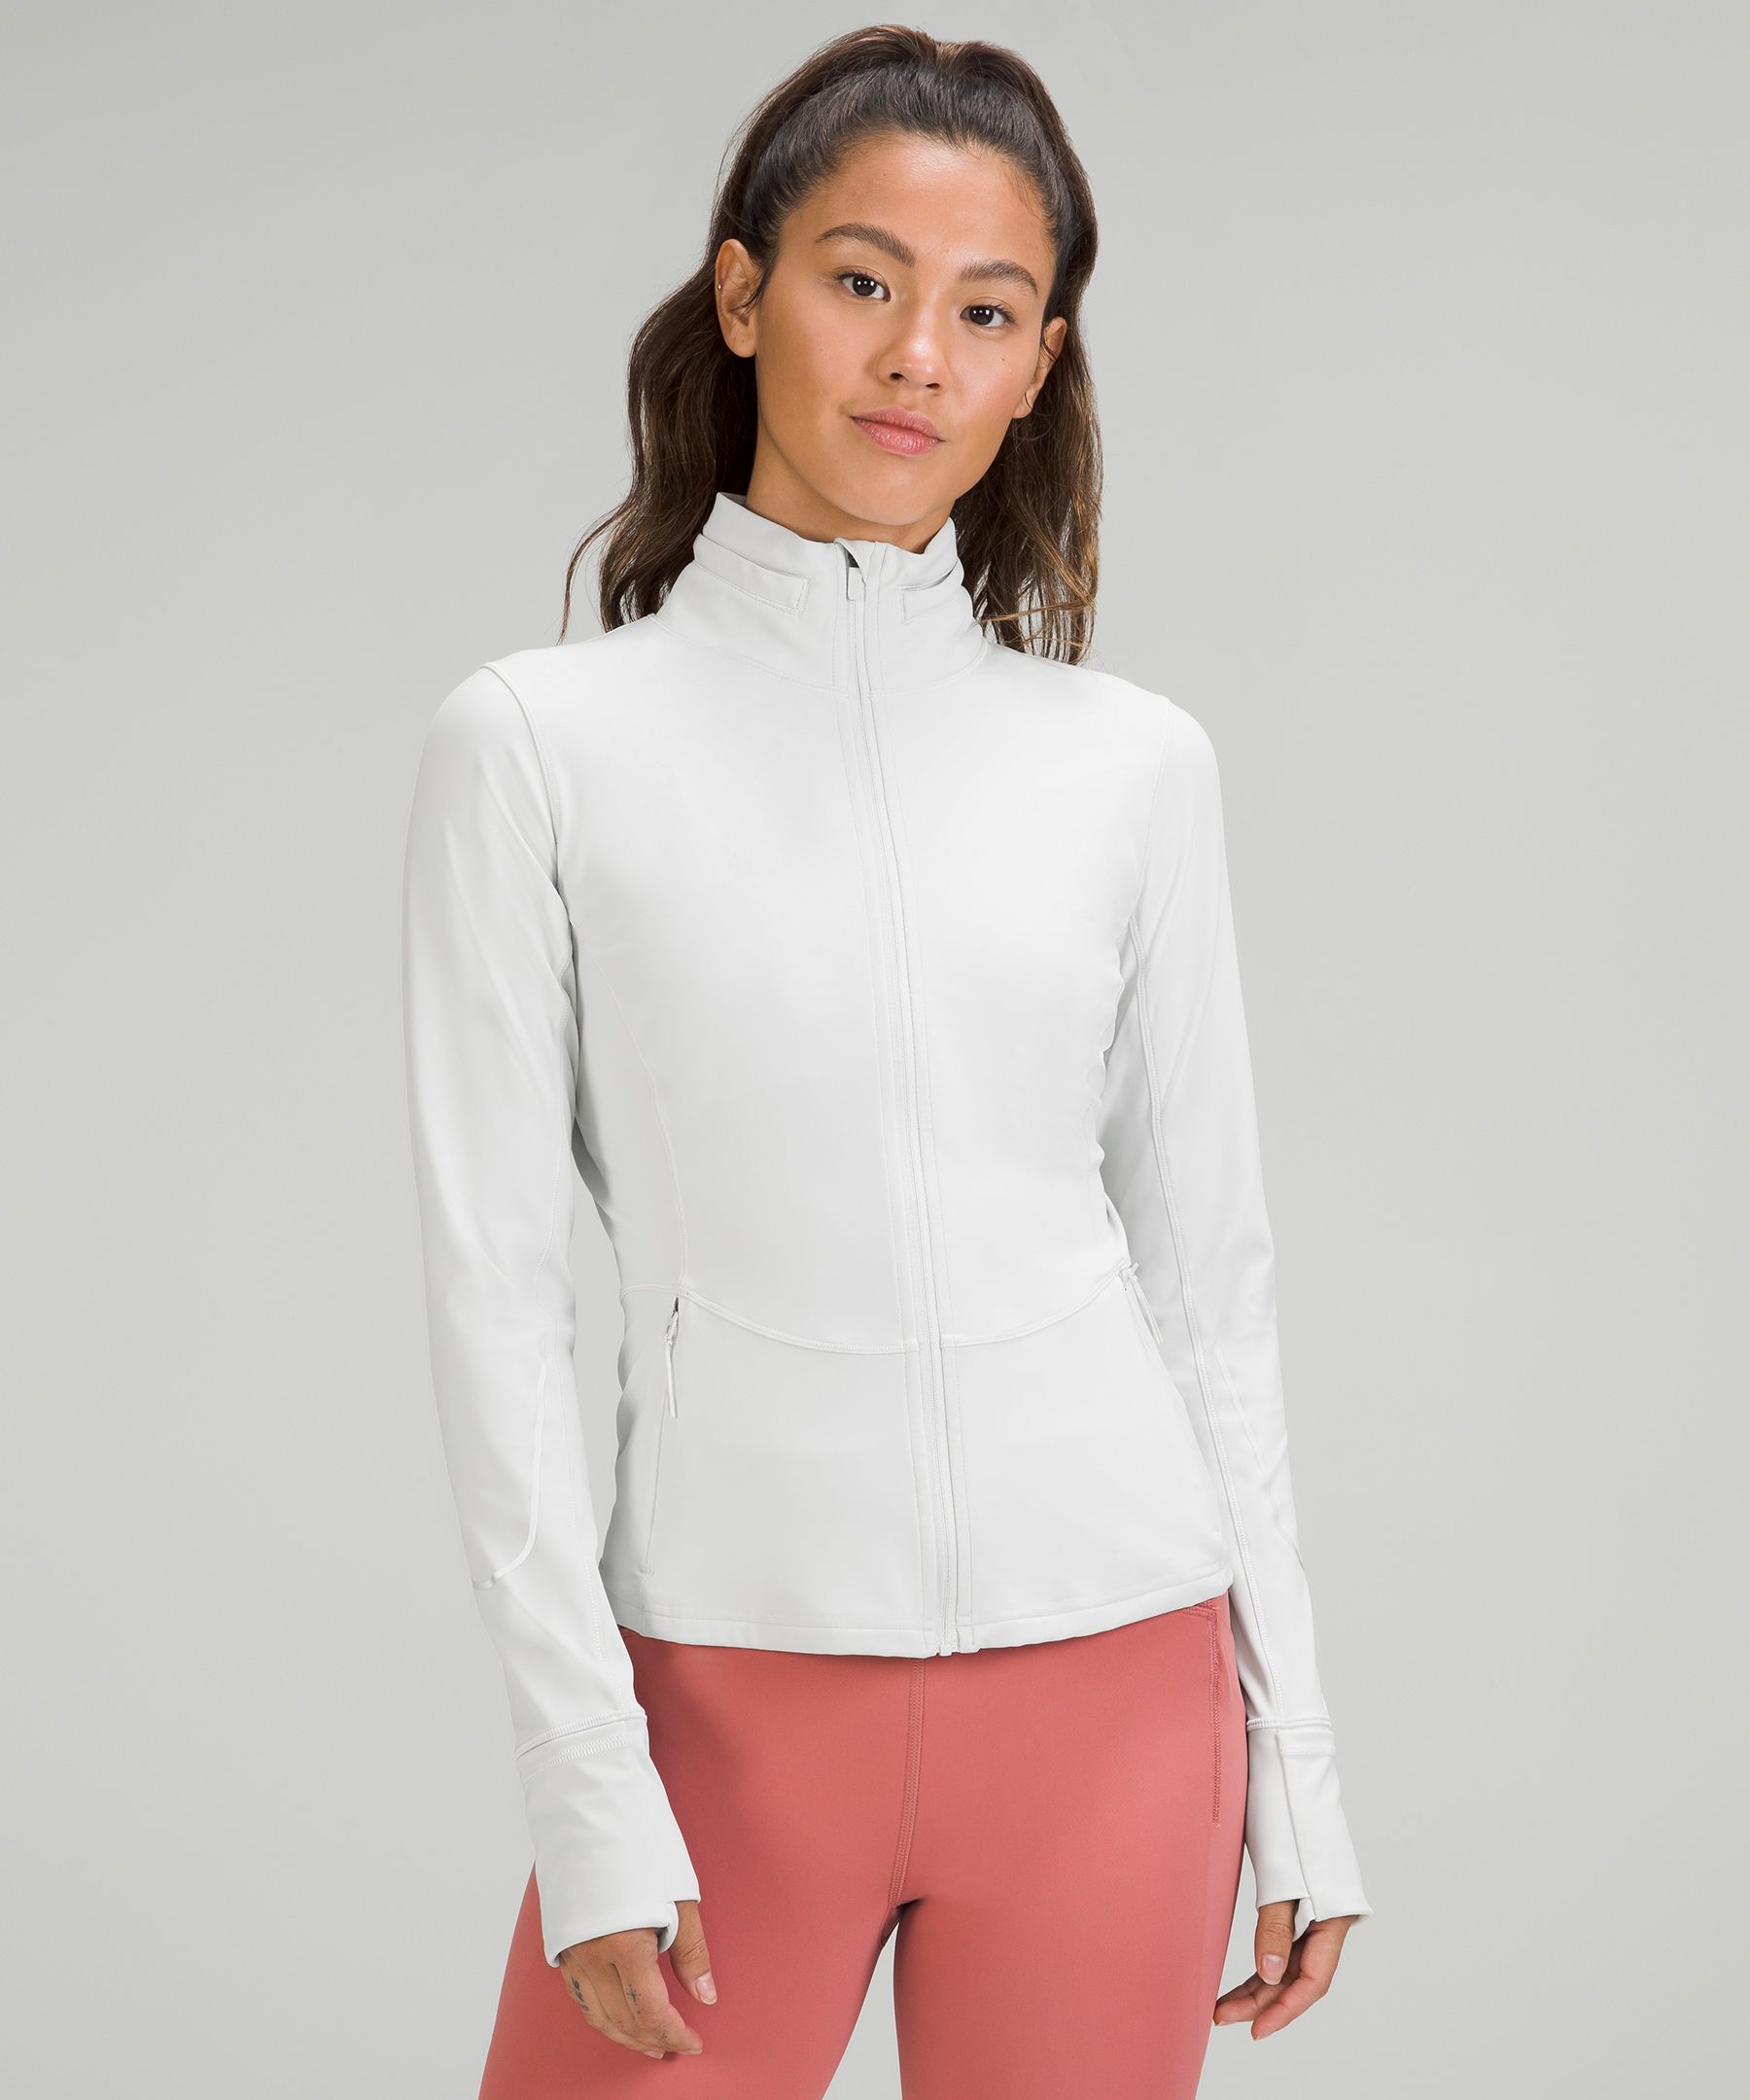 Friday Mail She's Here! R/lululemon, 46% OFF